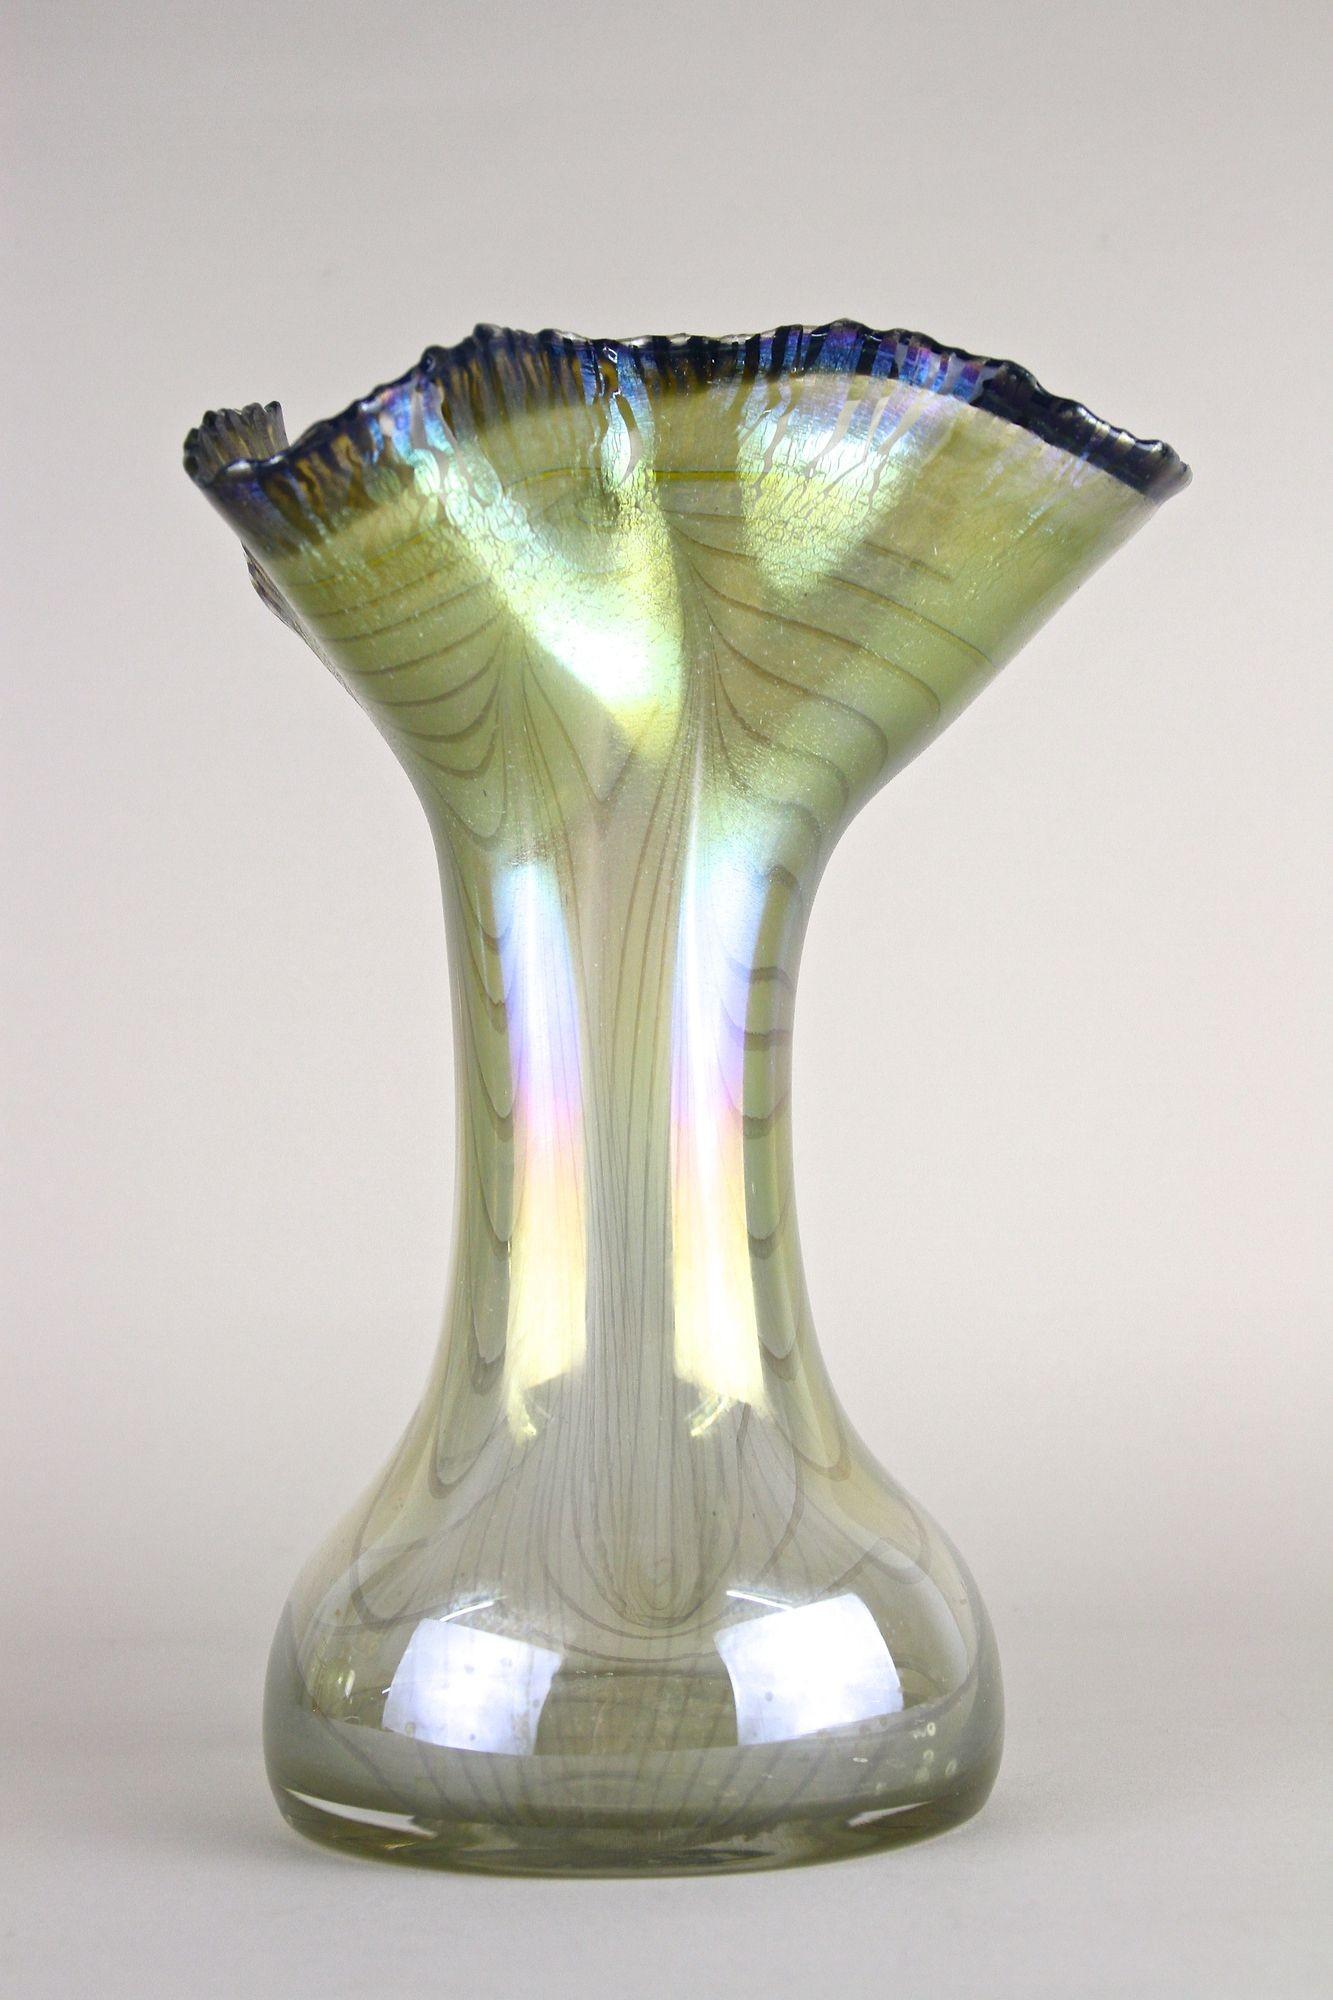 Amazing looking, absolute rare 20th century glass vase by famous German glass artist Erwin Eisch (1927 - 2022) made in 1982. The name of Erwin Eisch is inextricably linked with the international studio glass movement that liberated the material